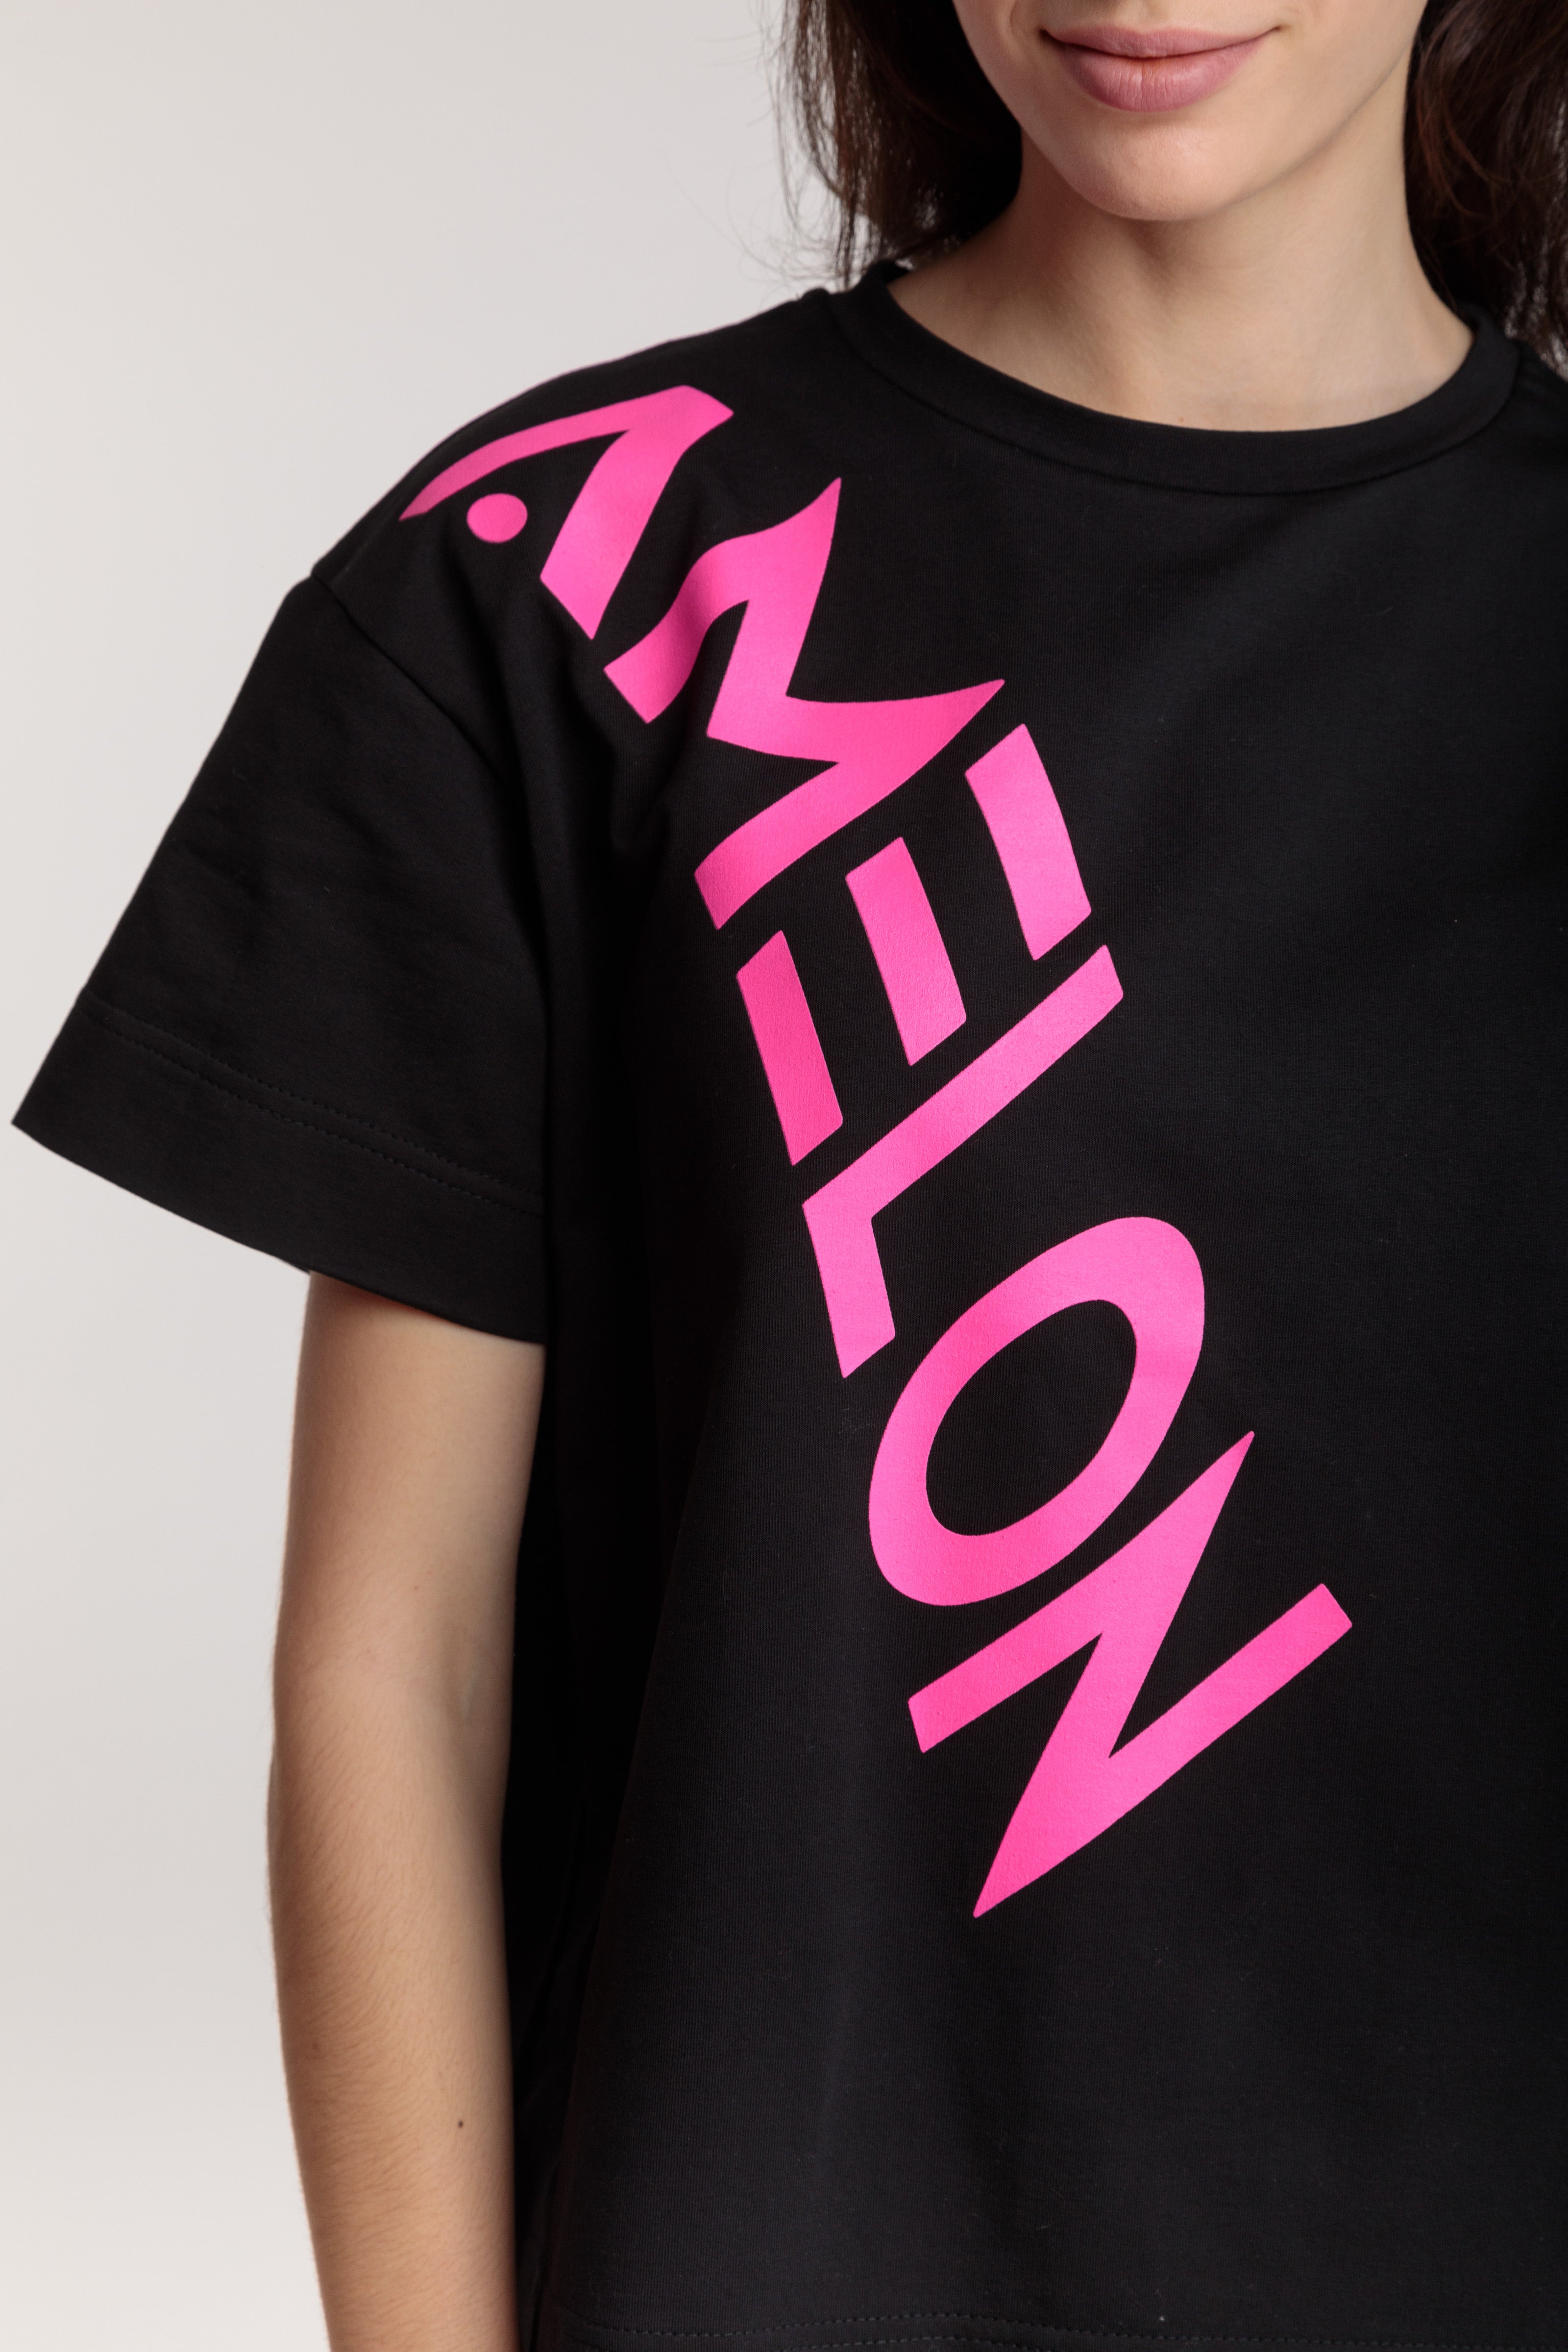 Women's straight black t-shirt with a large pink lettering